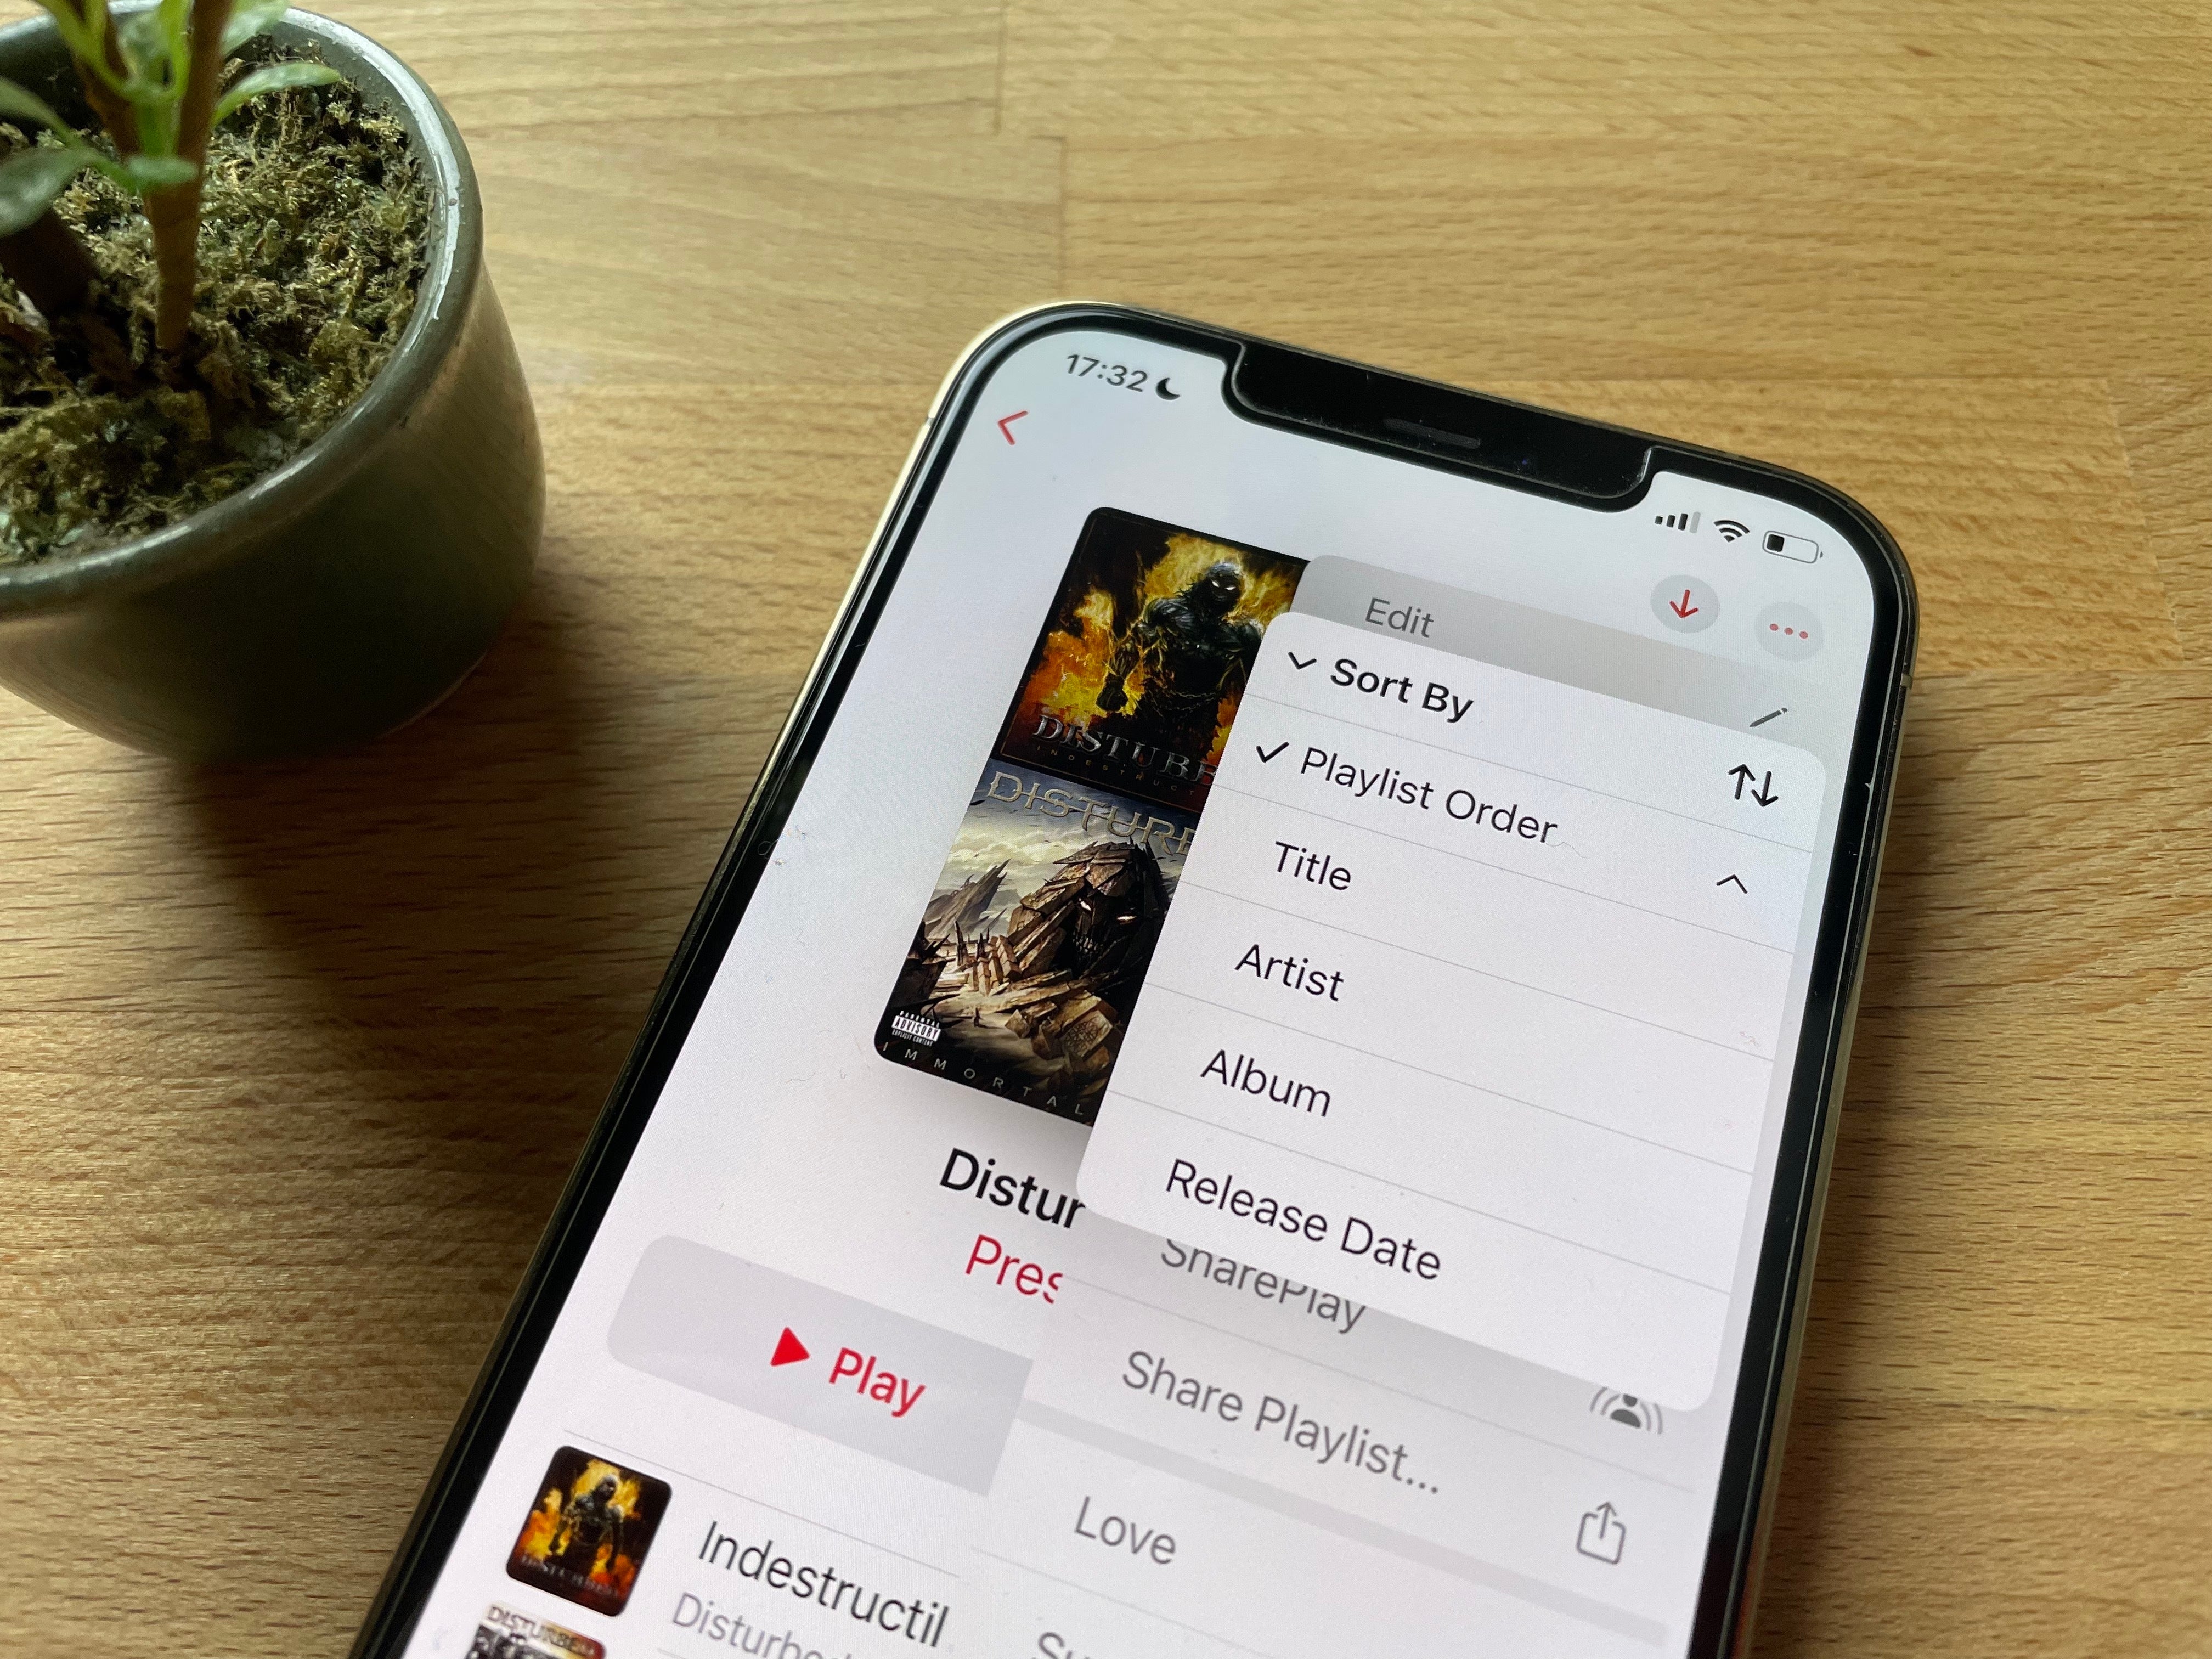 iOS 16 adds two exciting new features to the Apple Music app